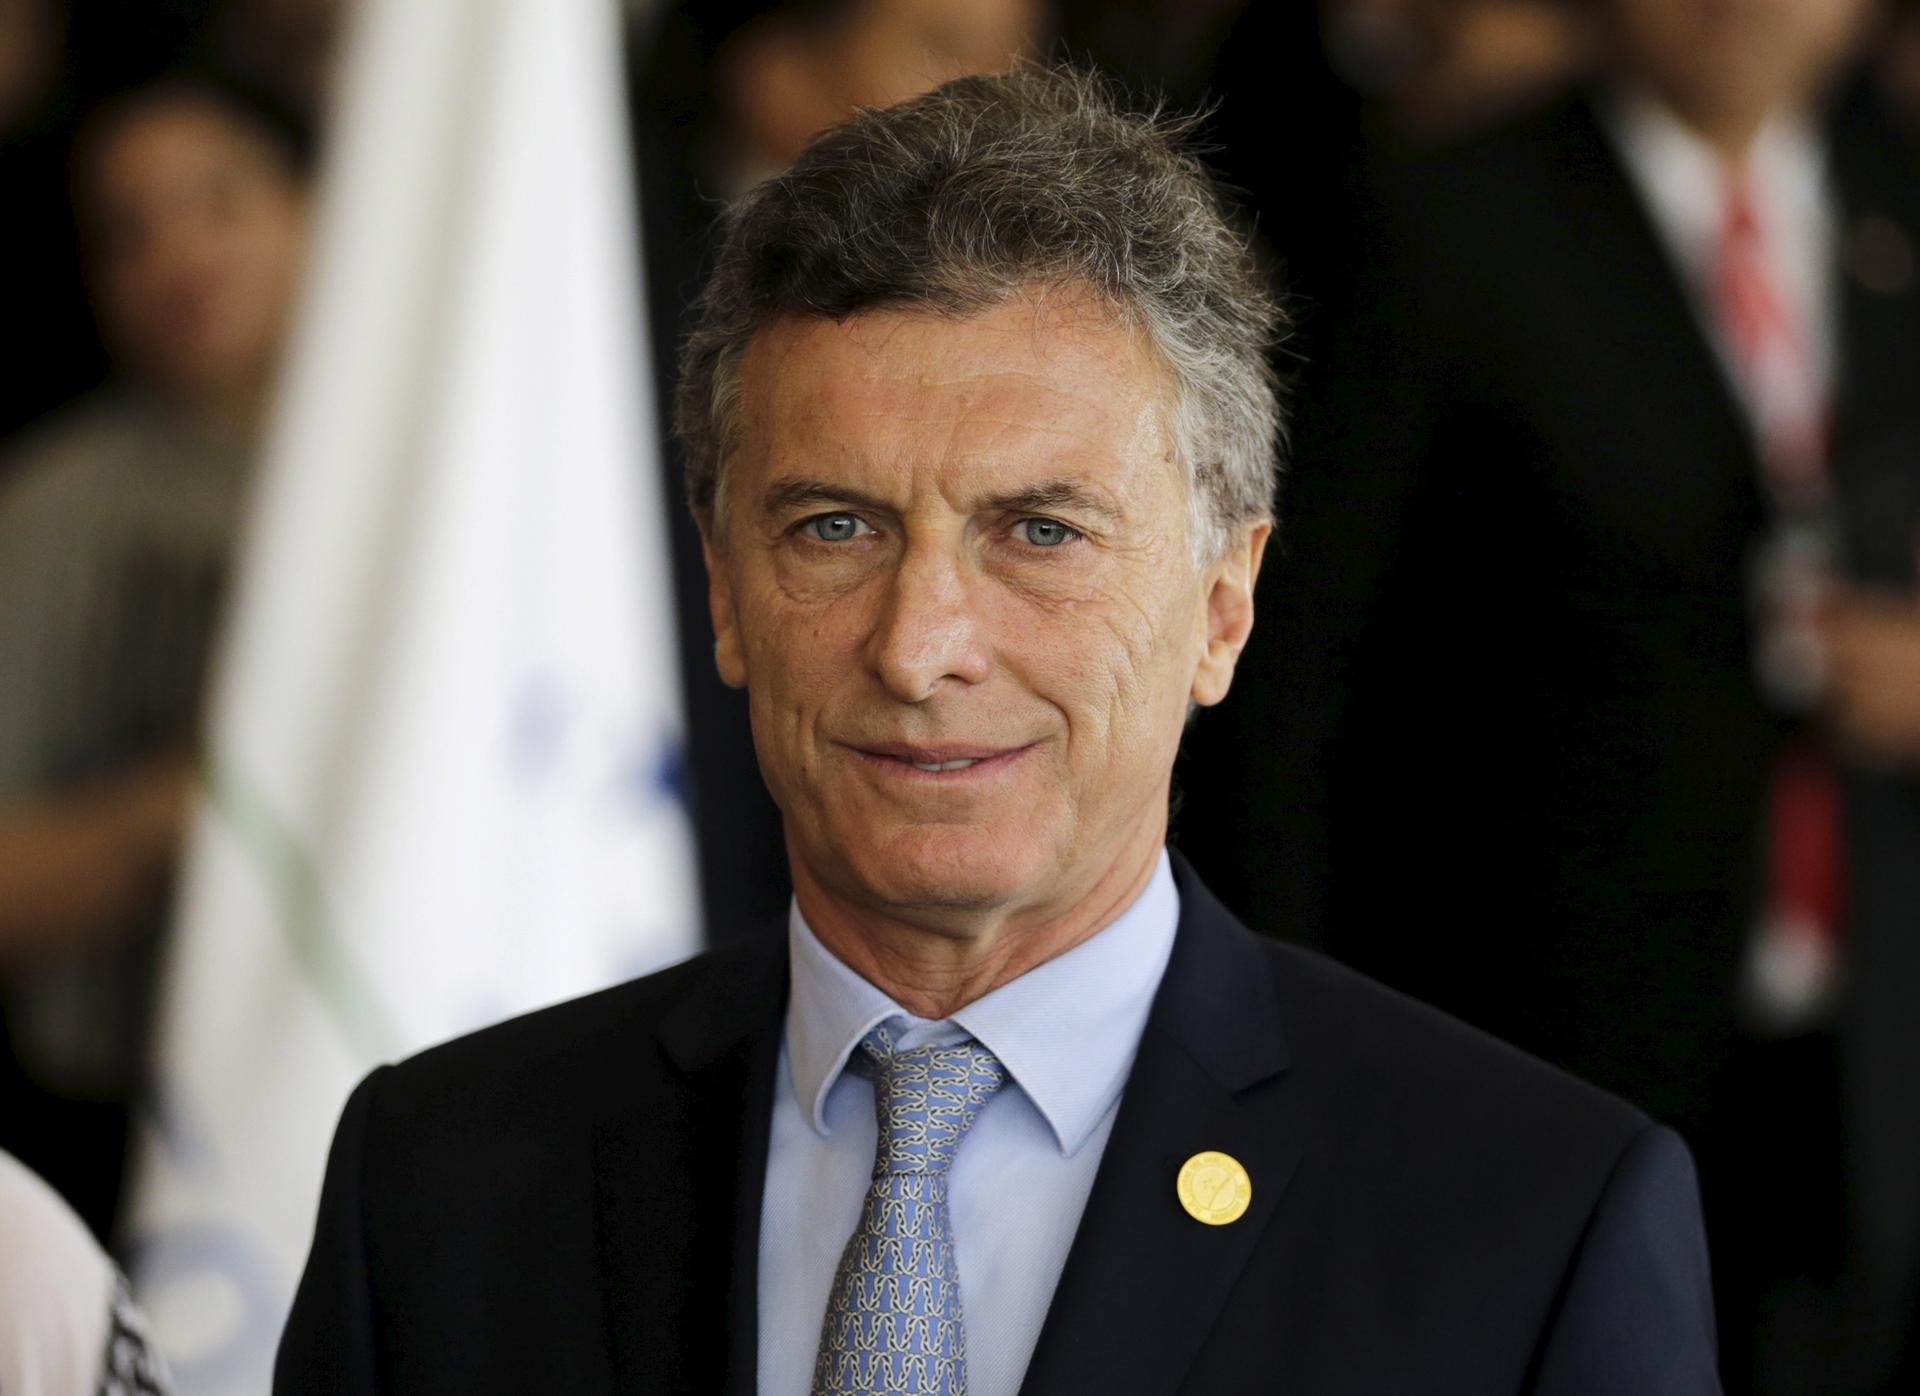 Argentina's President Mauricio Macri arrives for a session of the Summit of Heads of State of MERCOSUR and Associated States and 49th Meeting of the Common Market Council in Luque, Paraguay, December 21, 2015.